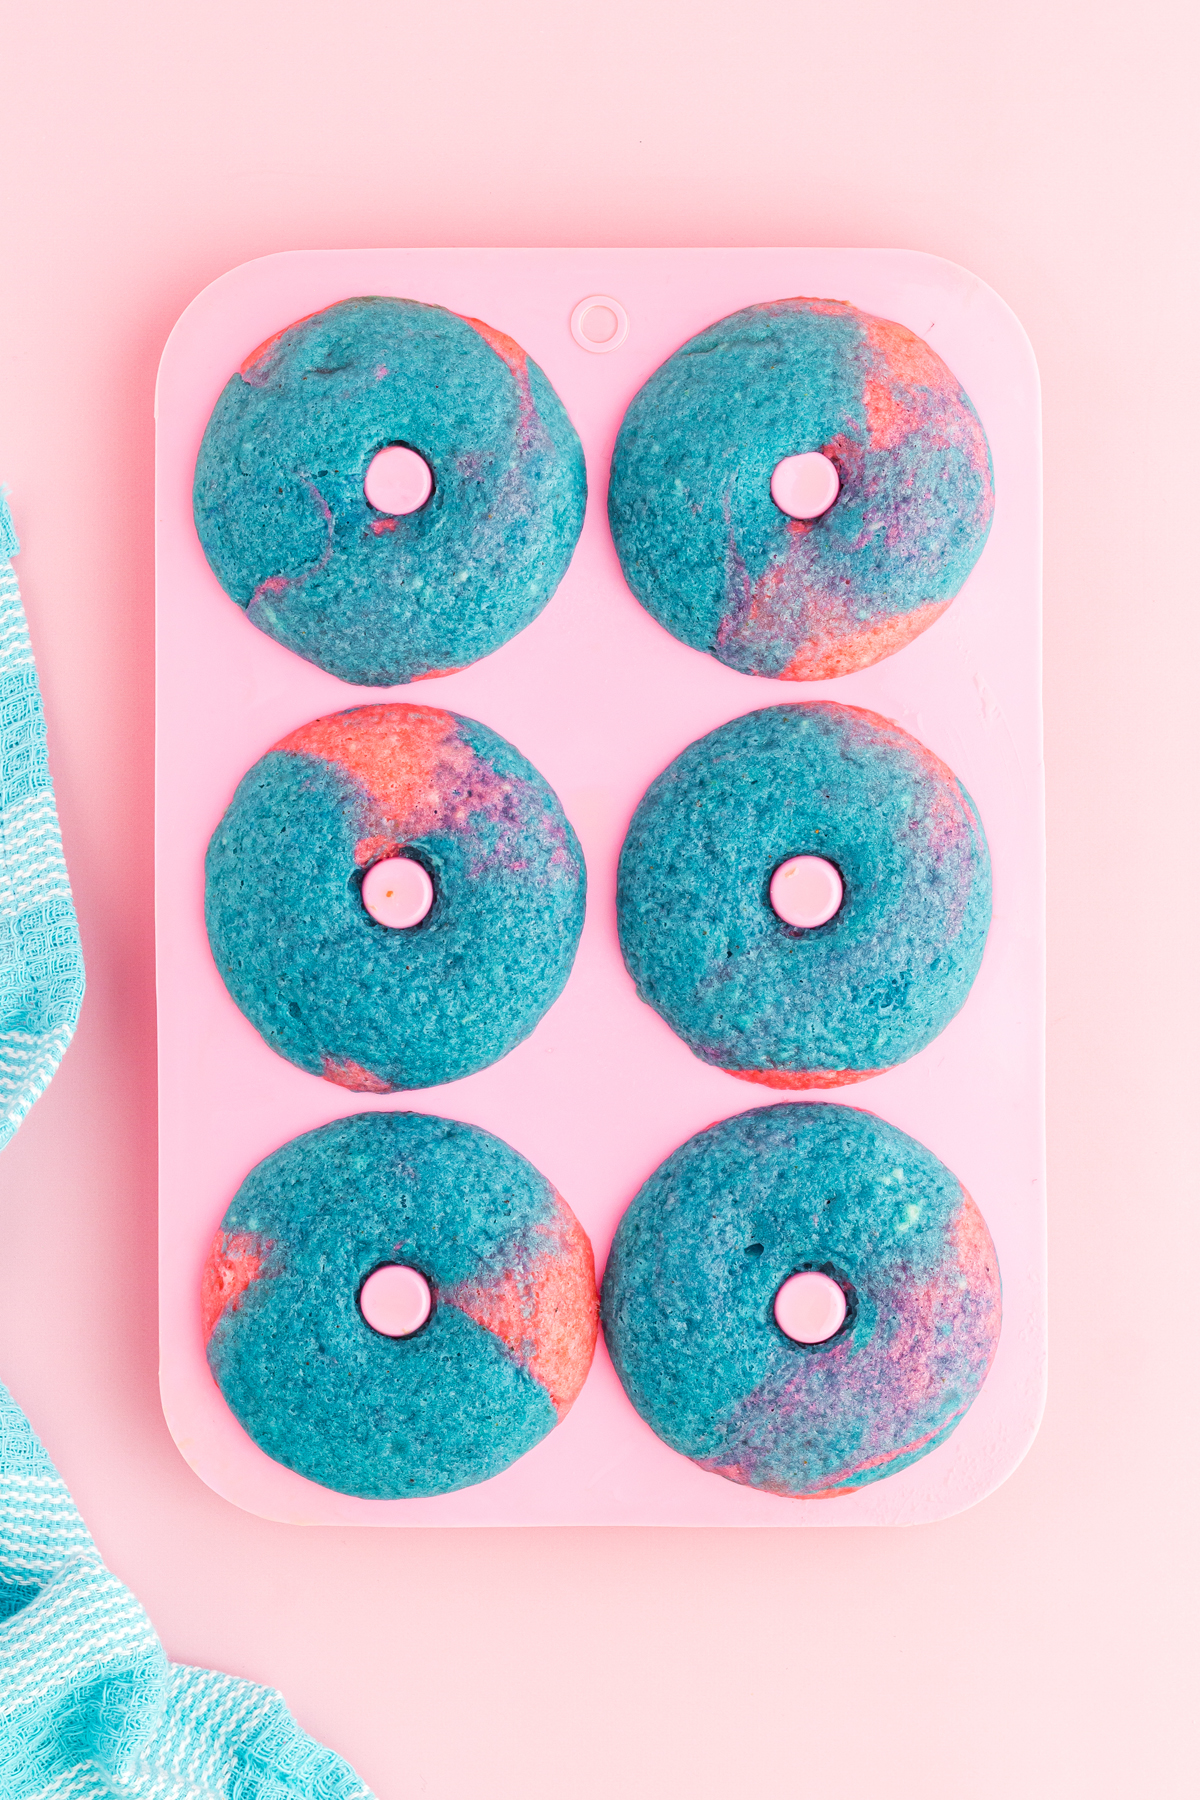 6 blue and pink mixed baked donuts in their pink donut pan on a pink background